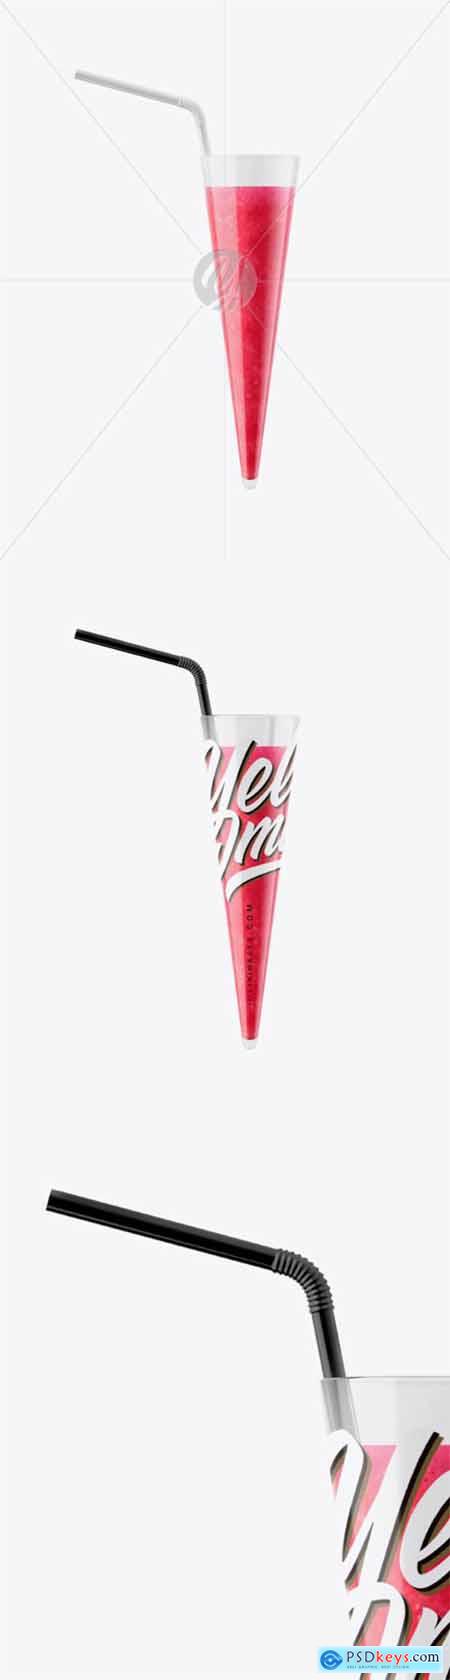 Plastic Cup w- Berries Smoothie and Straw Mockup 60720